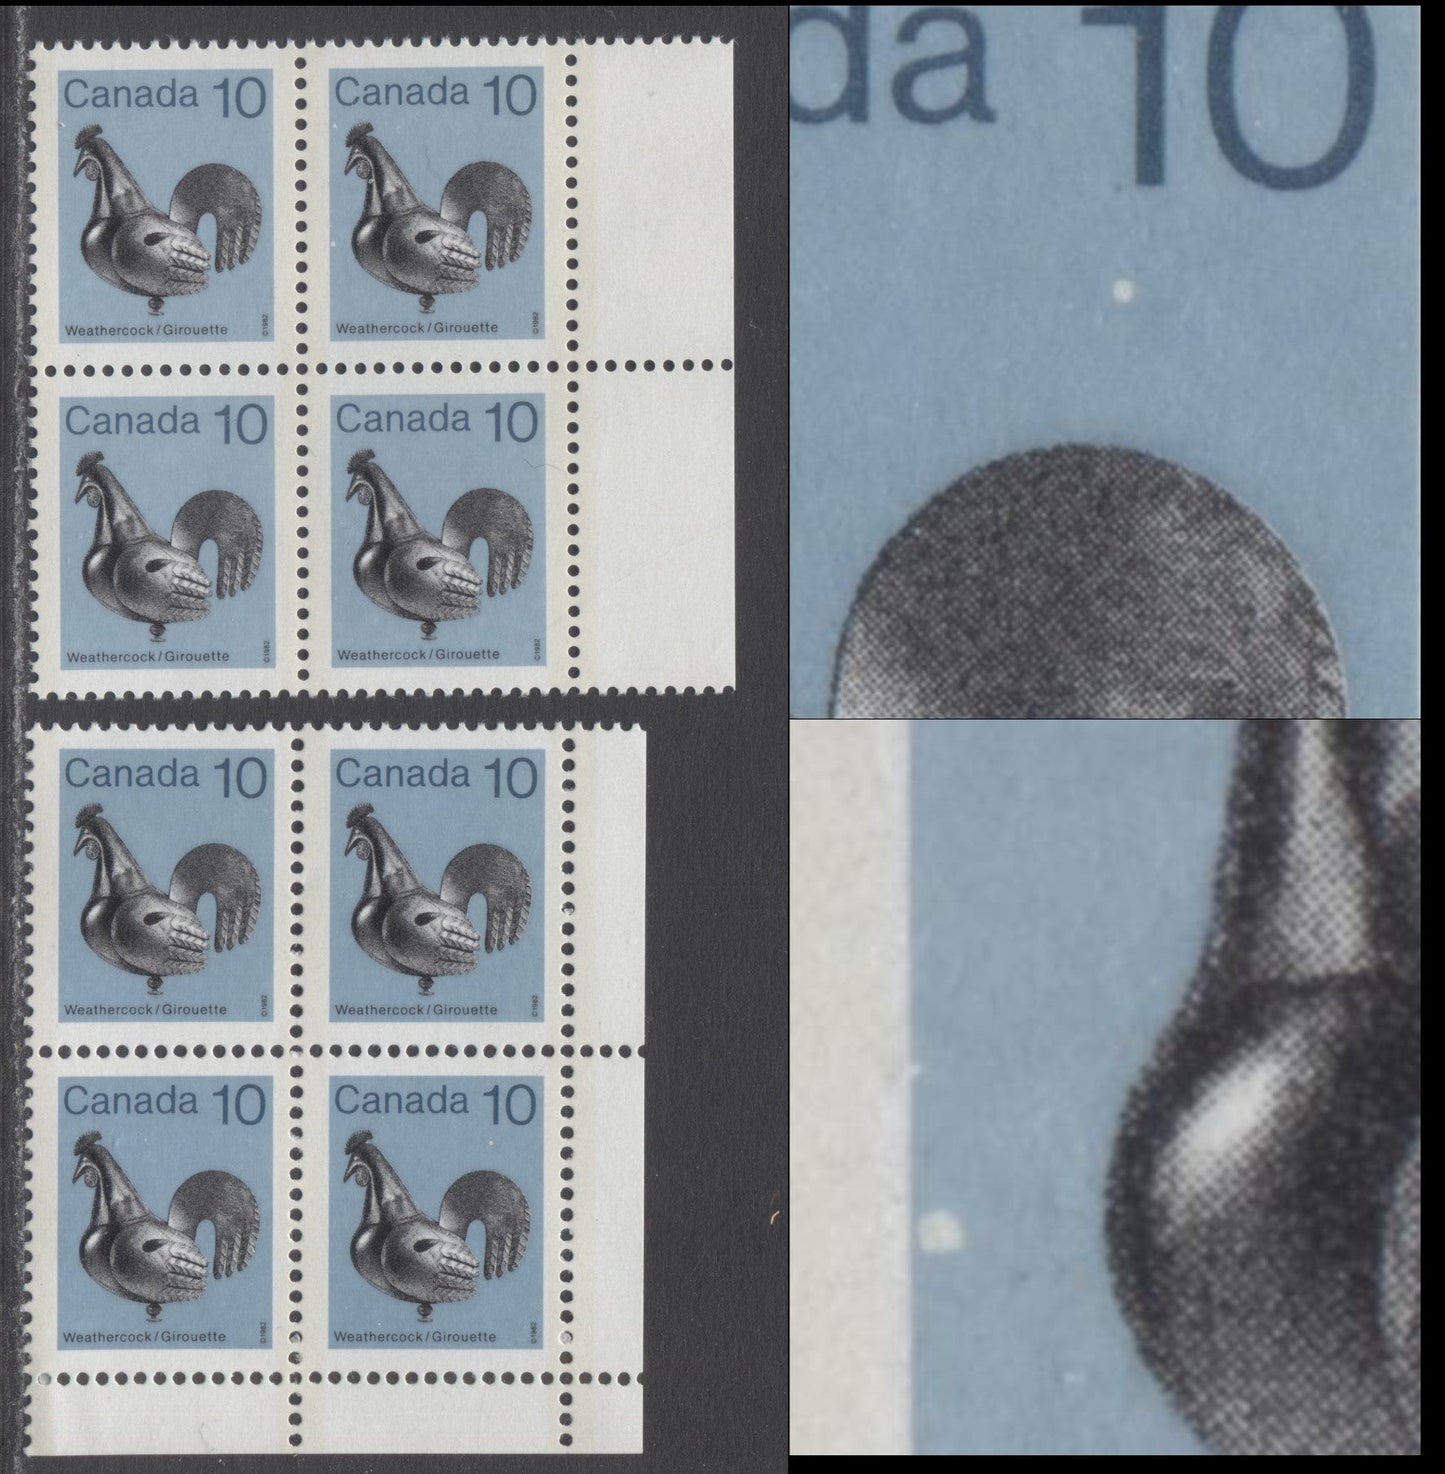 Lot 309 Canada #920 10c Blue & Multicolored Weathercock, 1982-1897 Low-Value Artifact Definitives, 2 F/VFNH LR & Right Blocks Of 4 With Dot Below 1 Of '10', Pos. 100 & To Left Of Rooster (Pos. 10/20/30…/100), DF1/DF2 Papers